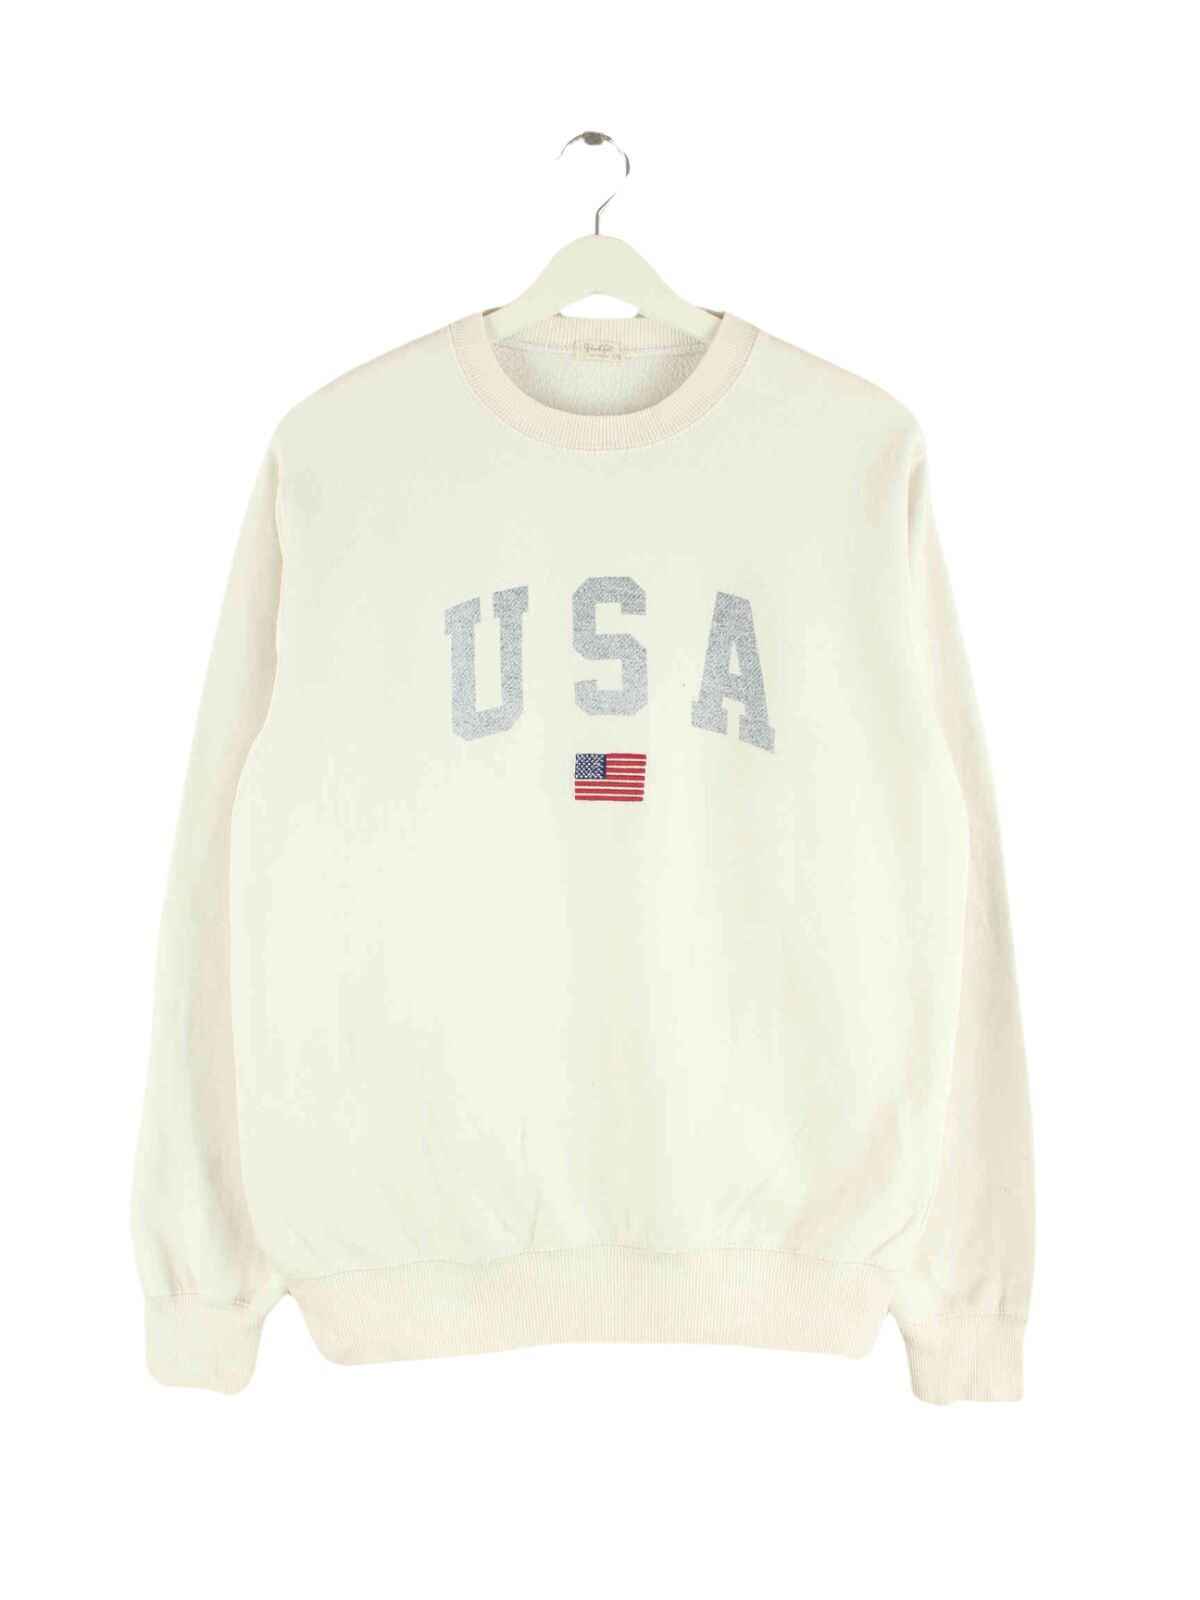 Vintage USA Sweater Weiß L (front image)